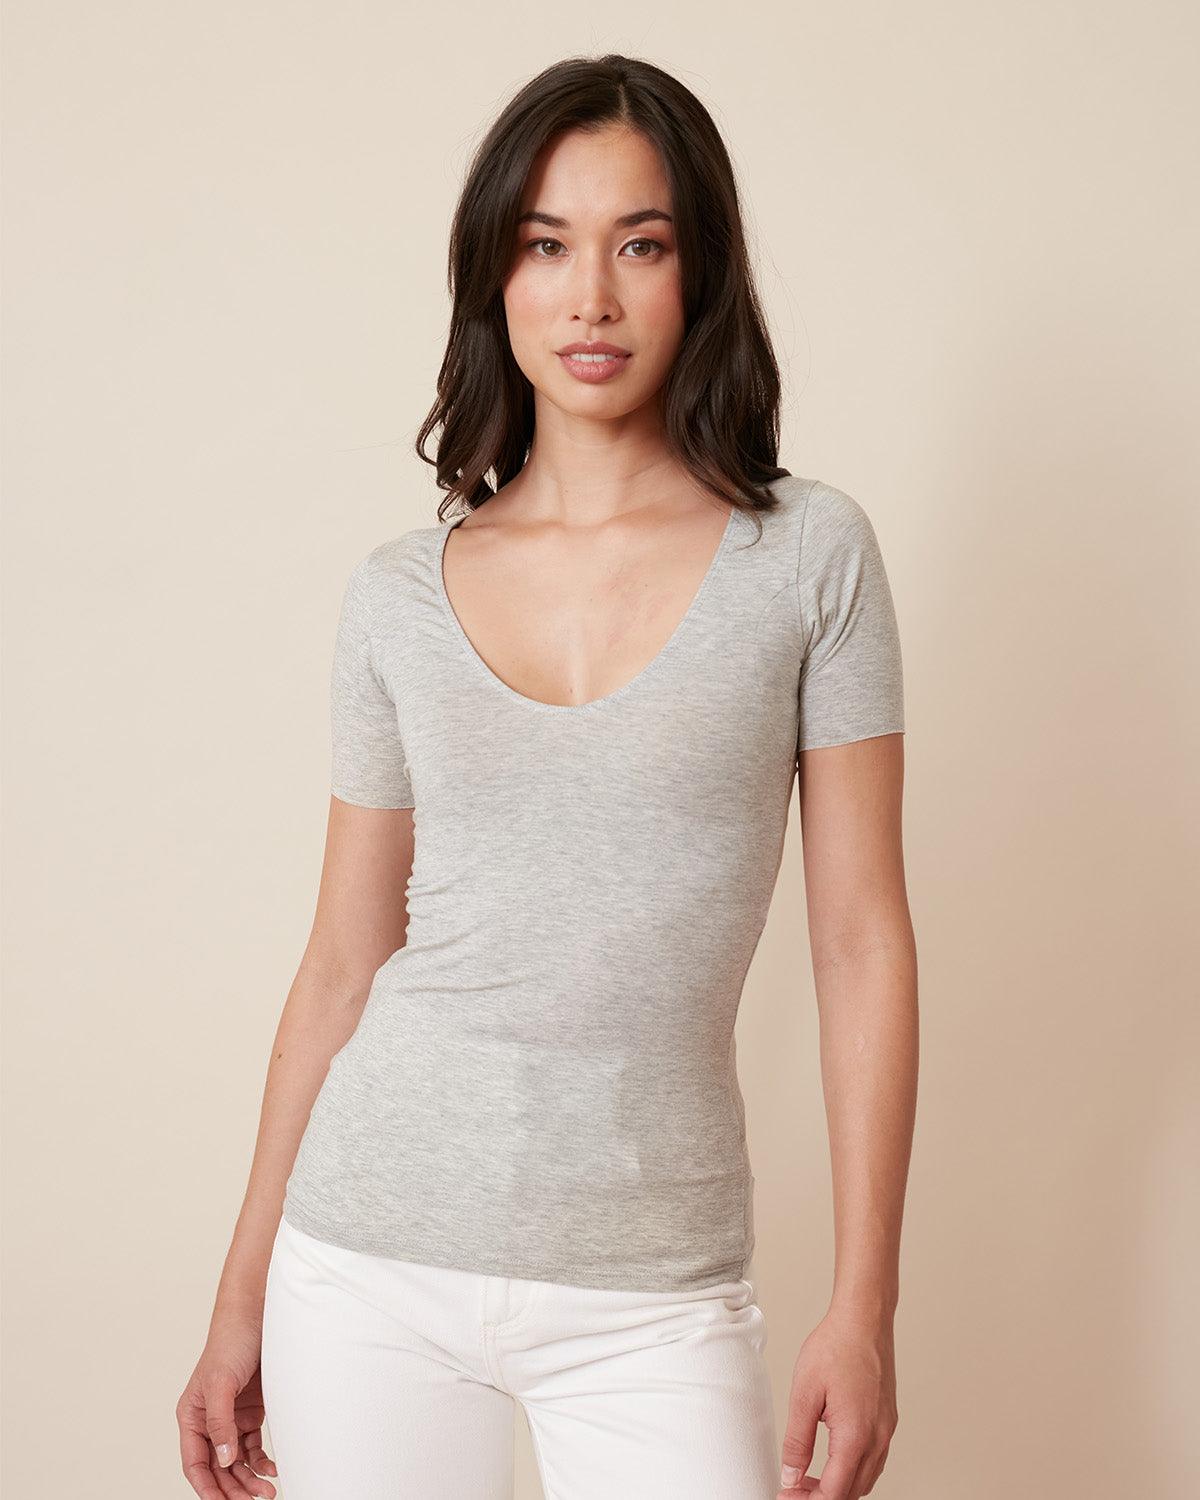 "#color_HEATHER GREY|Estyr is 5'9", wearing a size XS